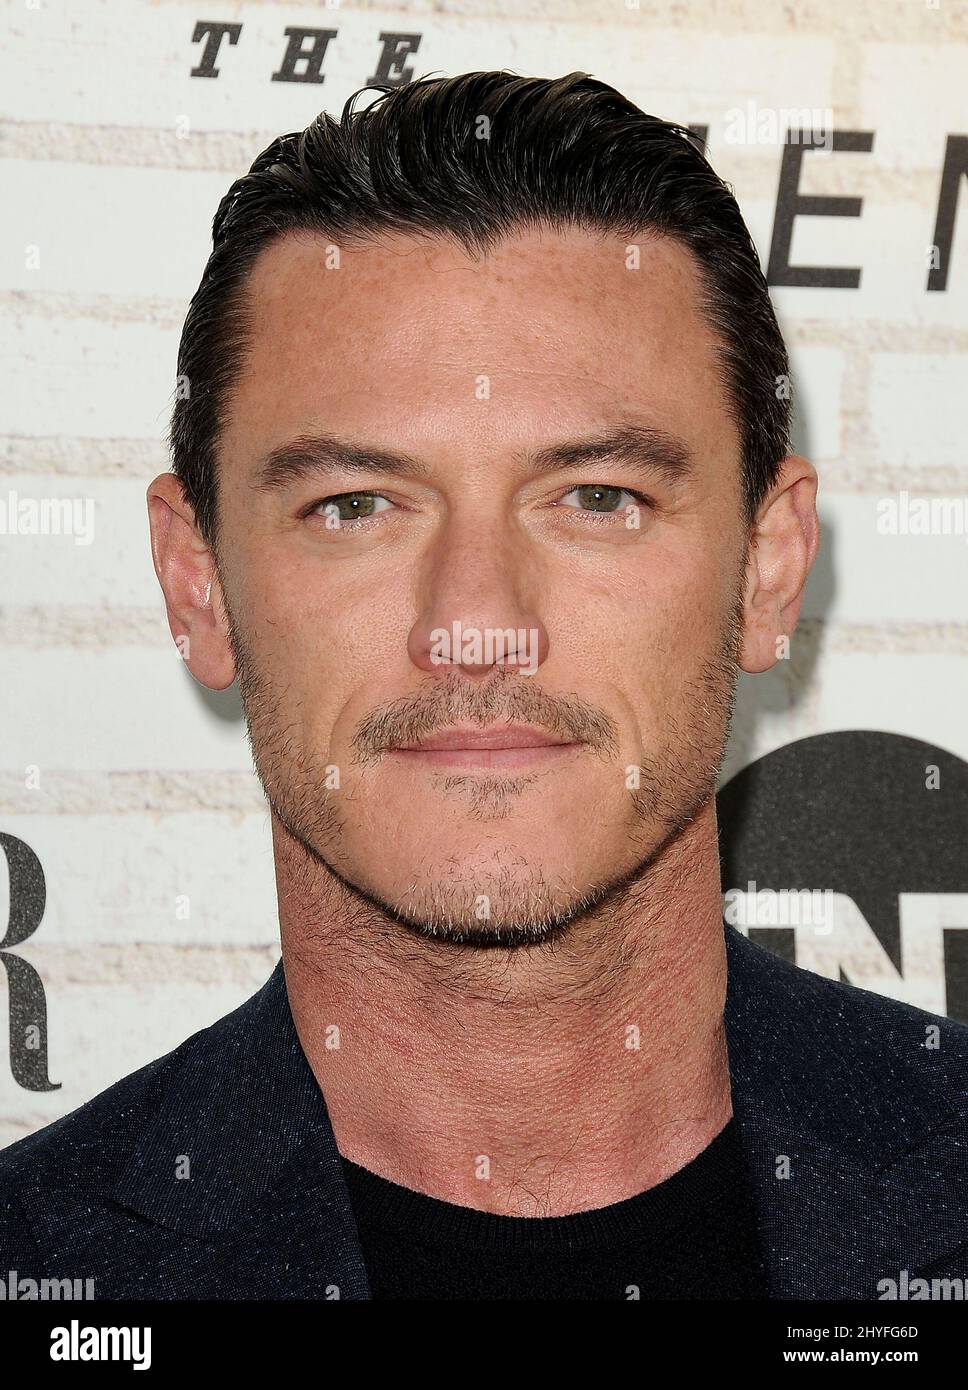 Luke Evans attending the NT's 'The Alienist' FYC event held at the Wallis Annenberg Center, CA on May 23, 2018. Stock Photo